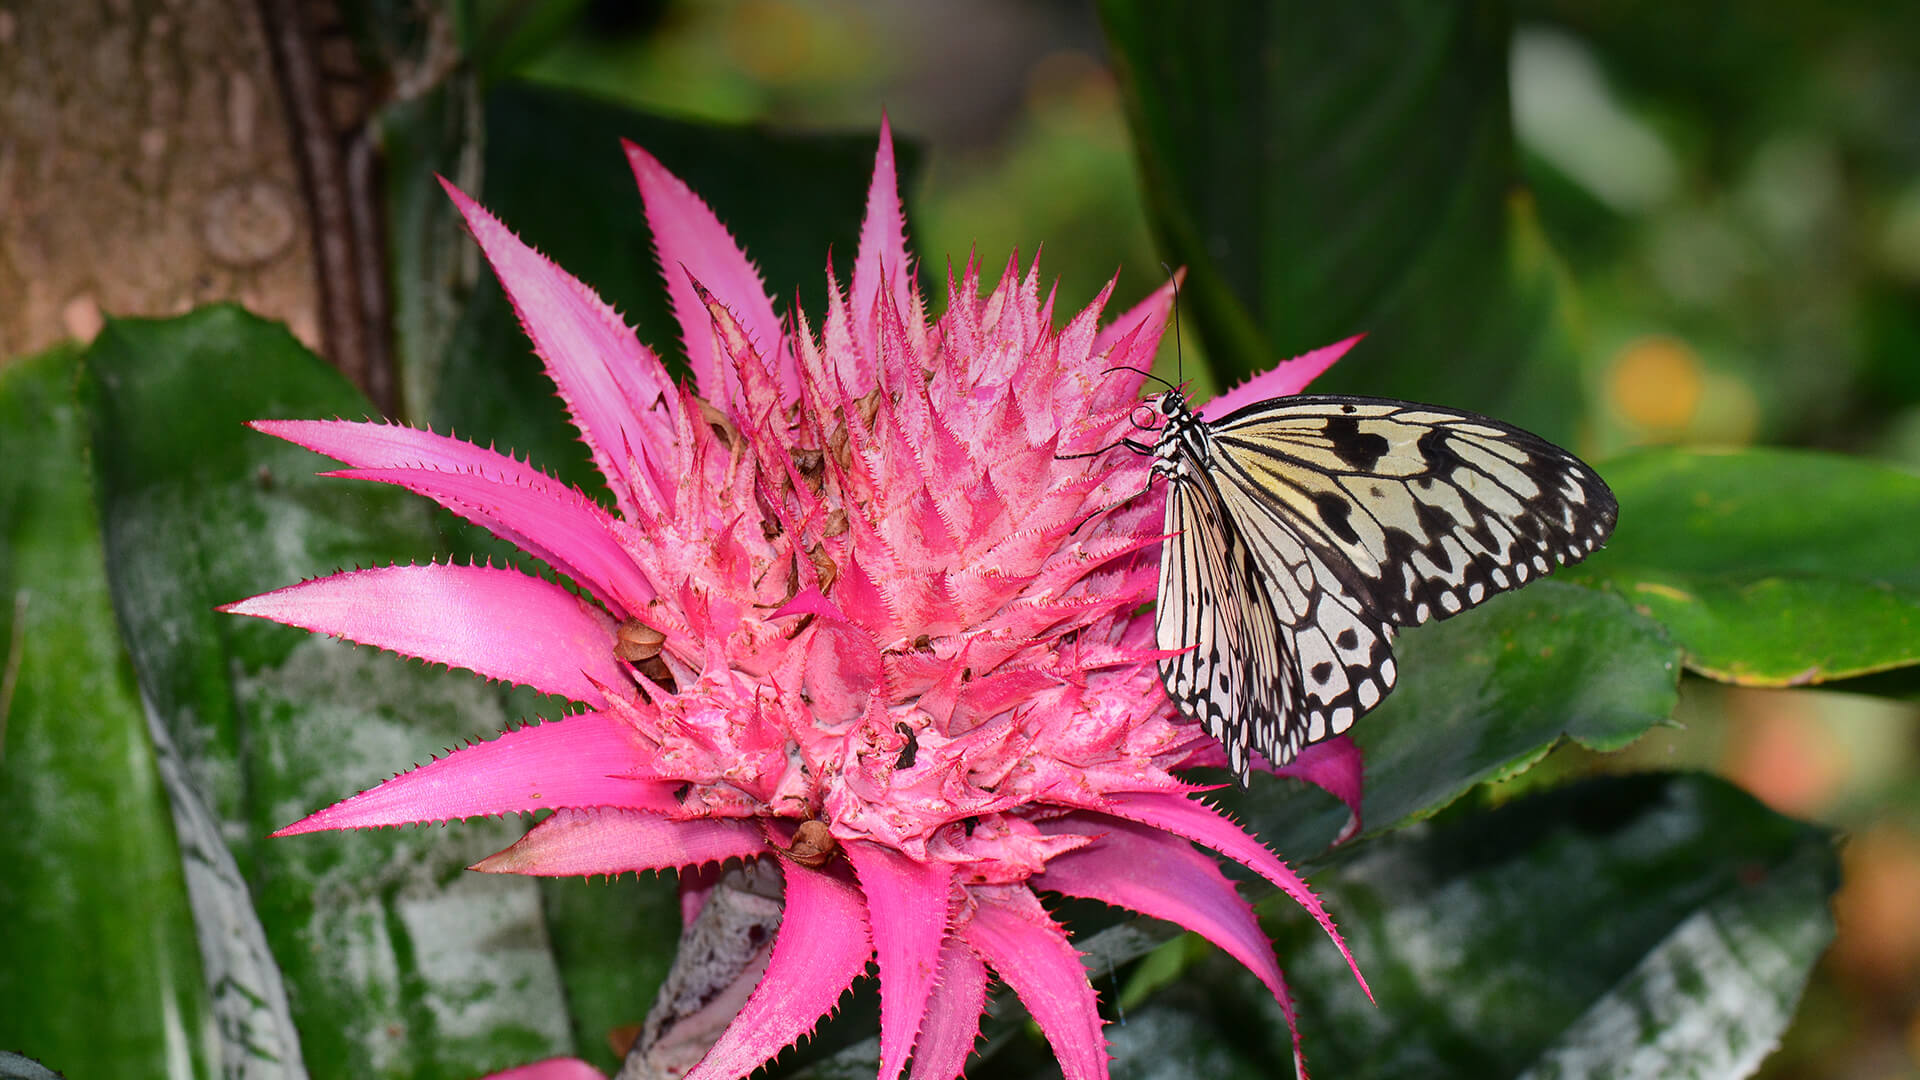 Butterfly sitting on a bright pink bromeliad flower